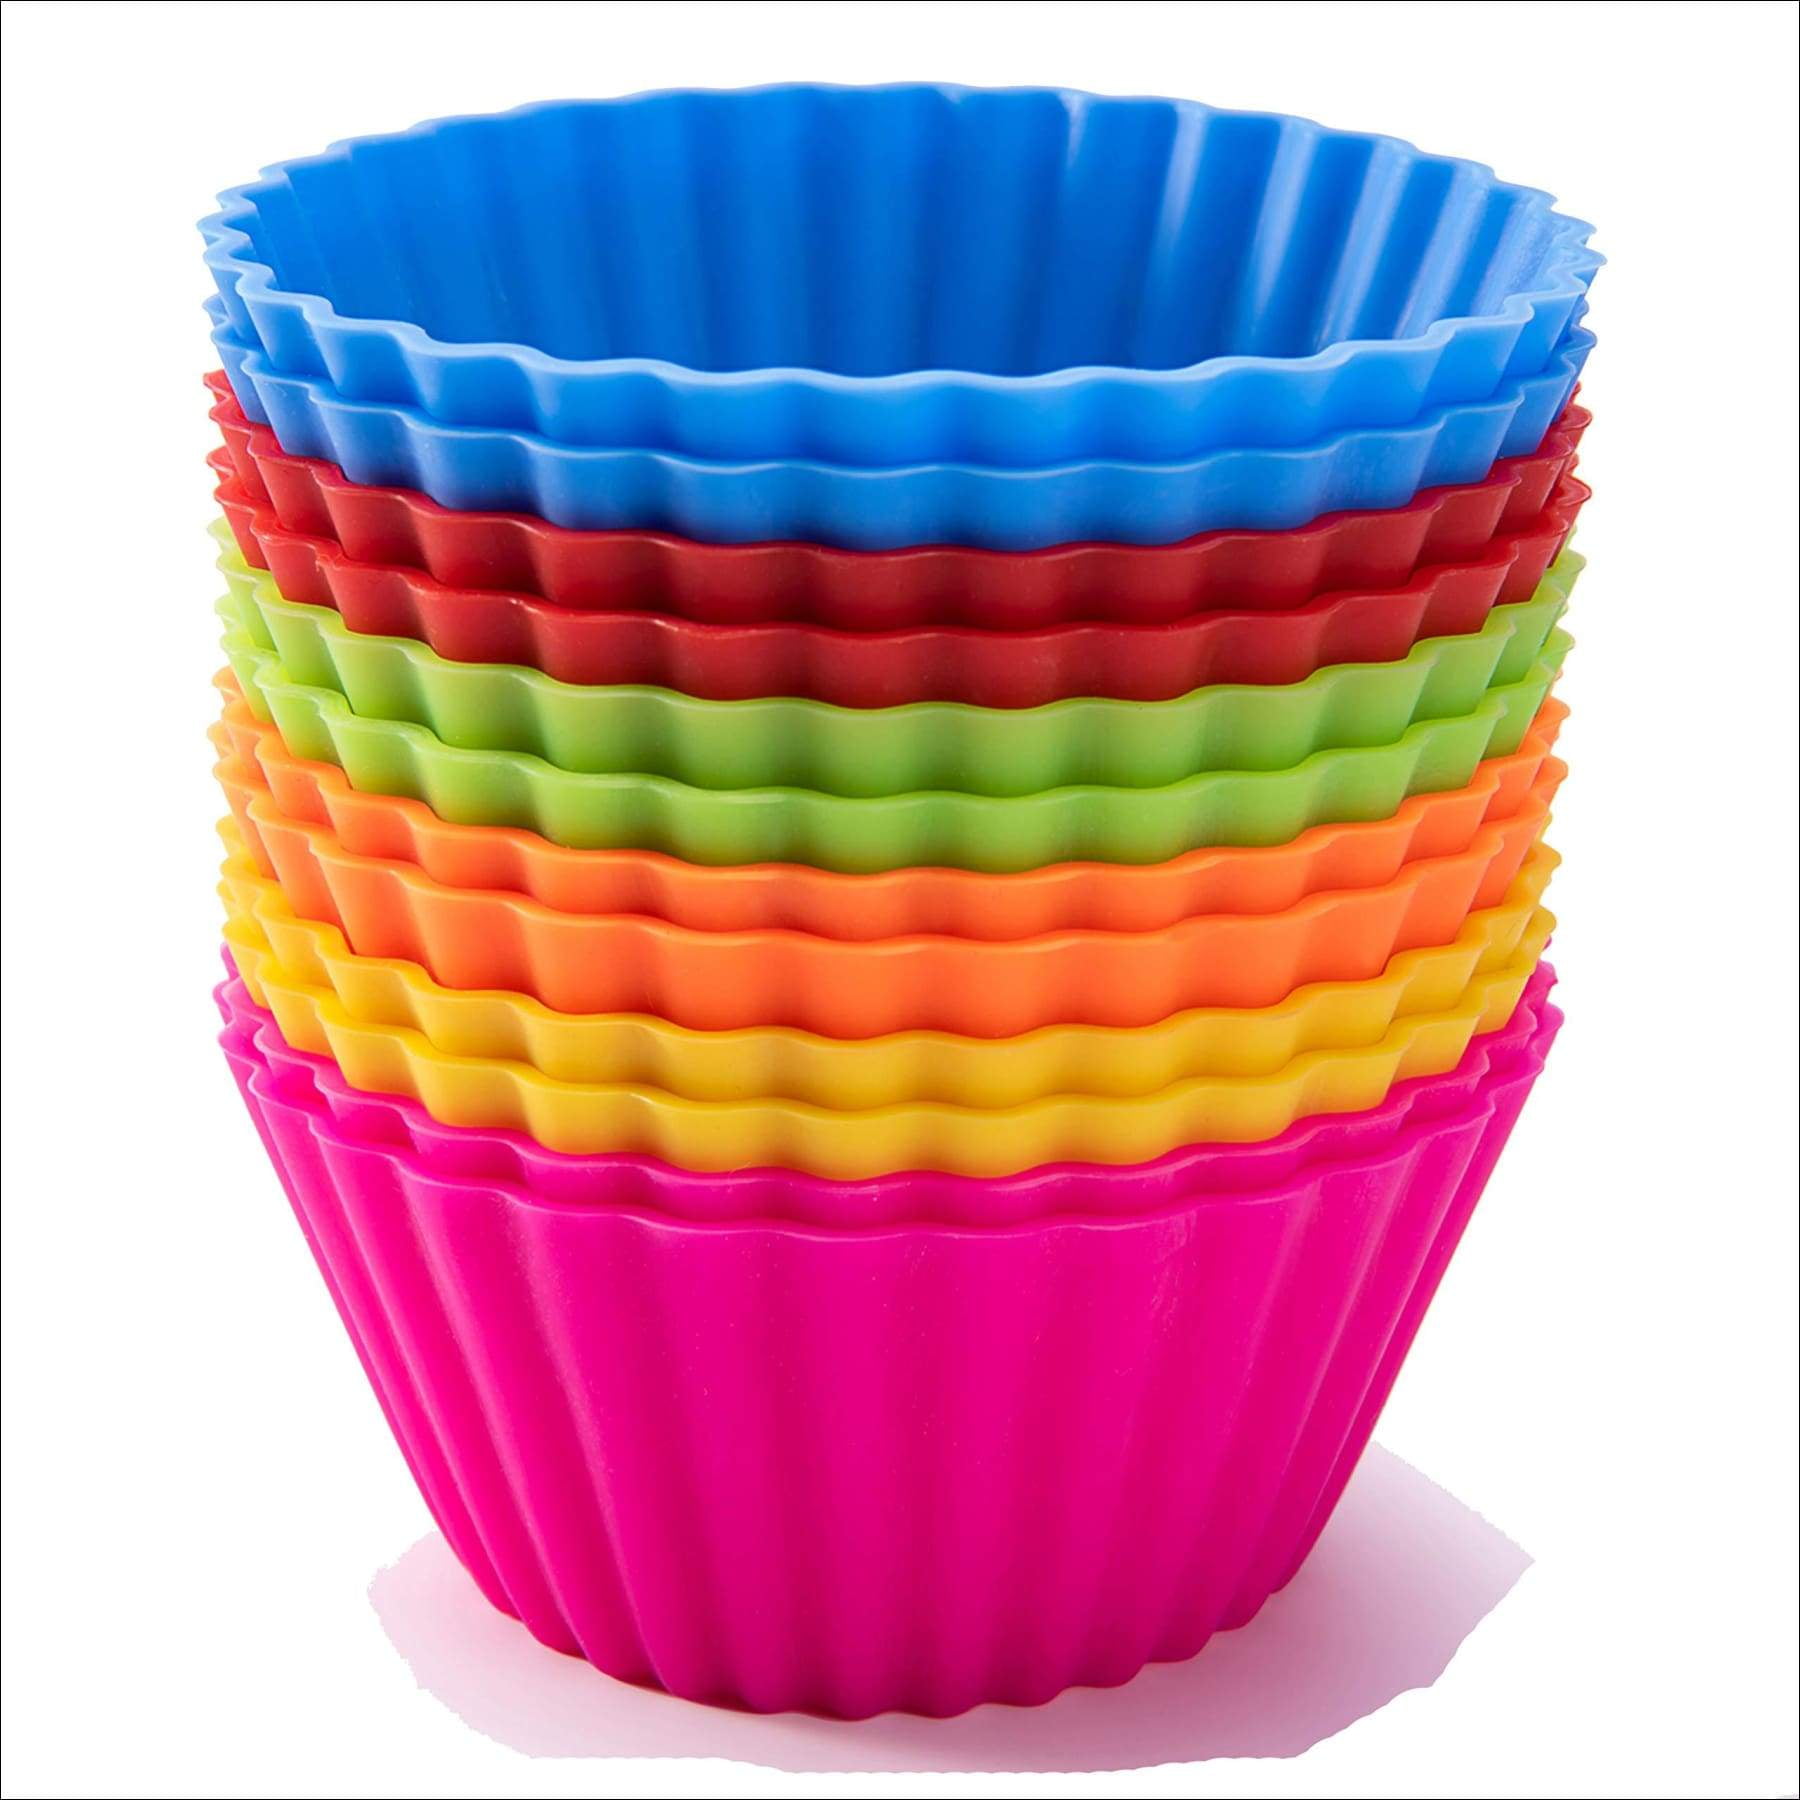 Pharamat Extra Large Silicone Cupcake Muffin Cups 24 Pack - 3.54 Inch  Non-stick Cupcake and Muffin Liners, Reusable Jumbo Silicone Baking Cups  Easy to